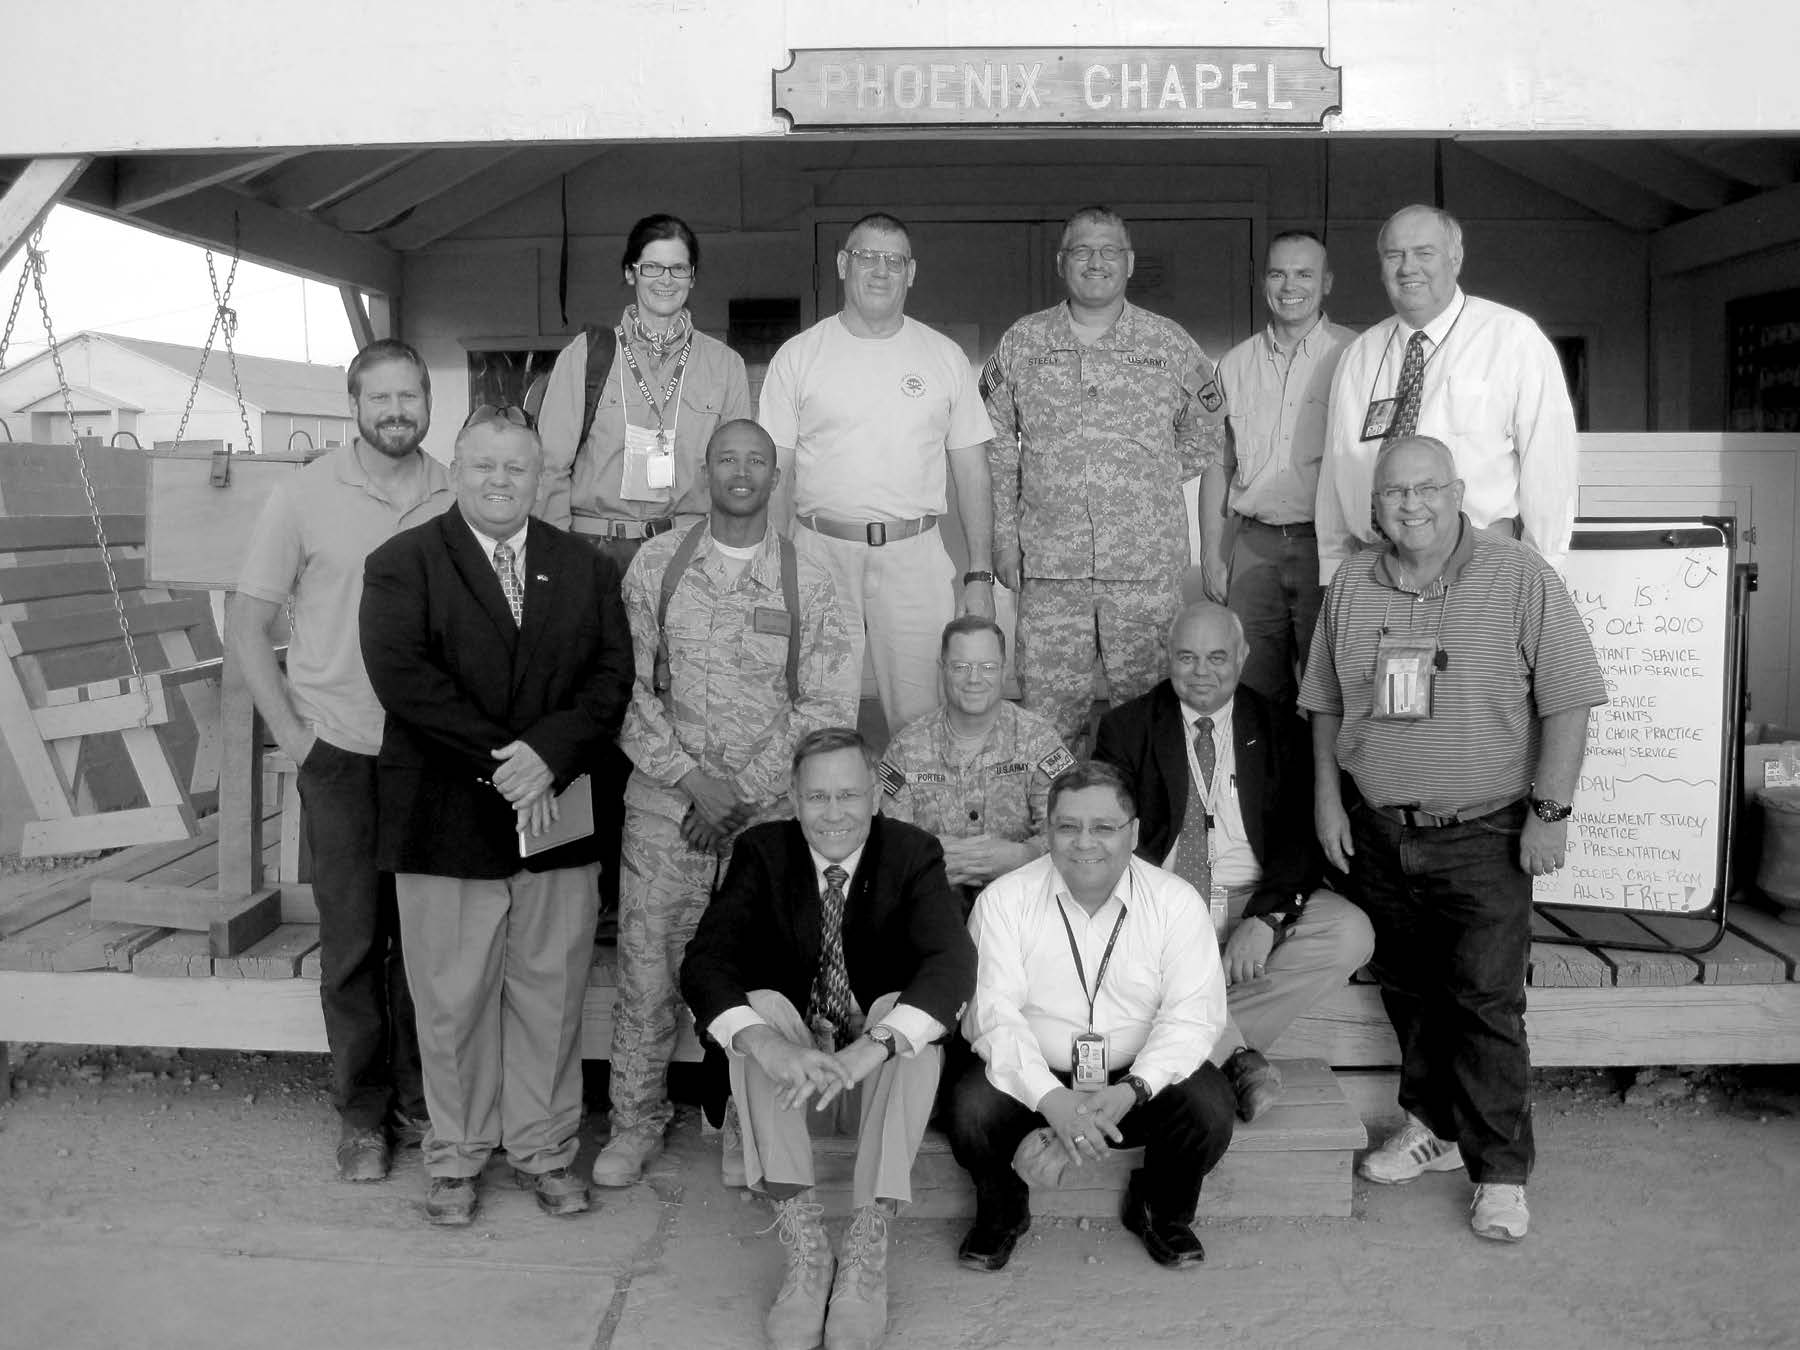 Camp Phoenix service member group with Eugene Wikle, district president (front row, left). Courtesy of Eugene J. Wikle.